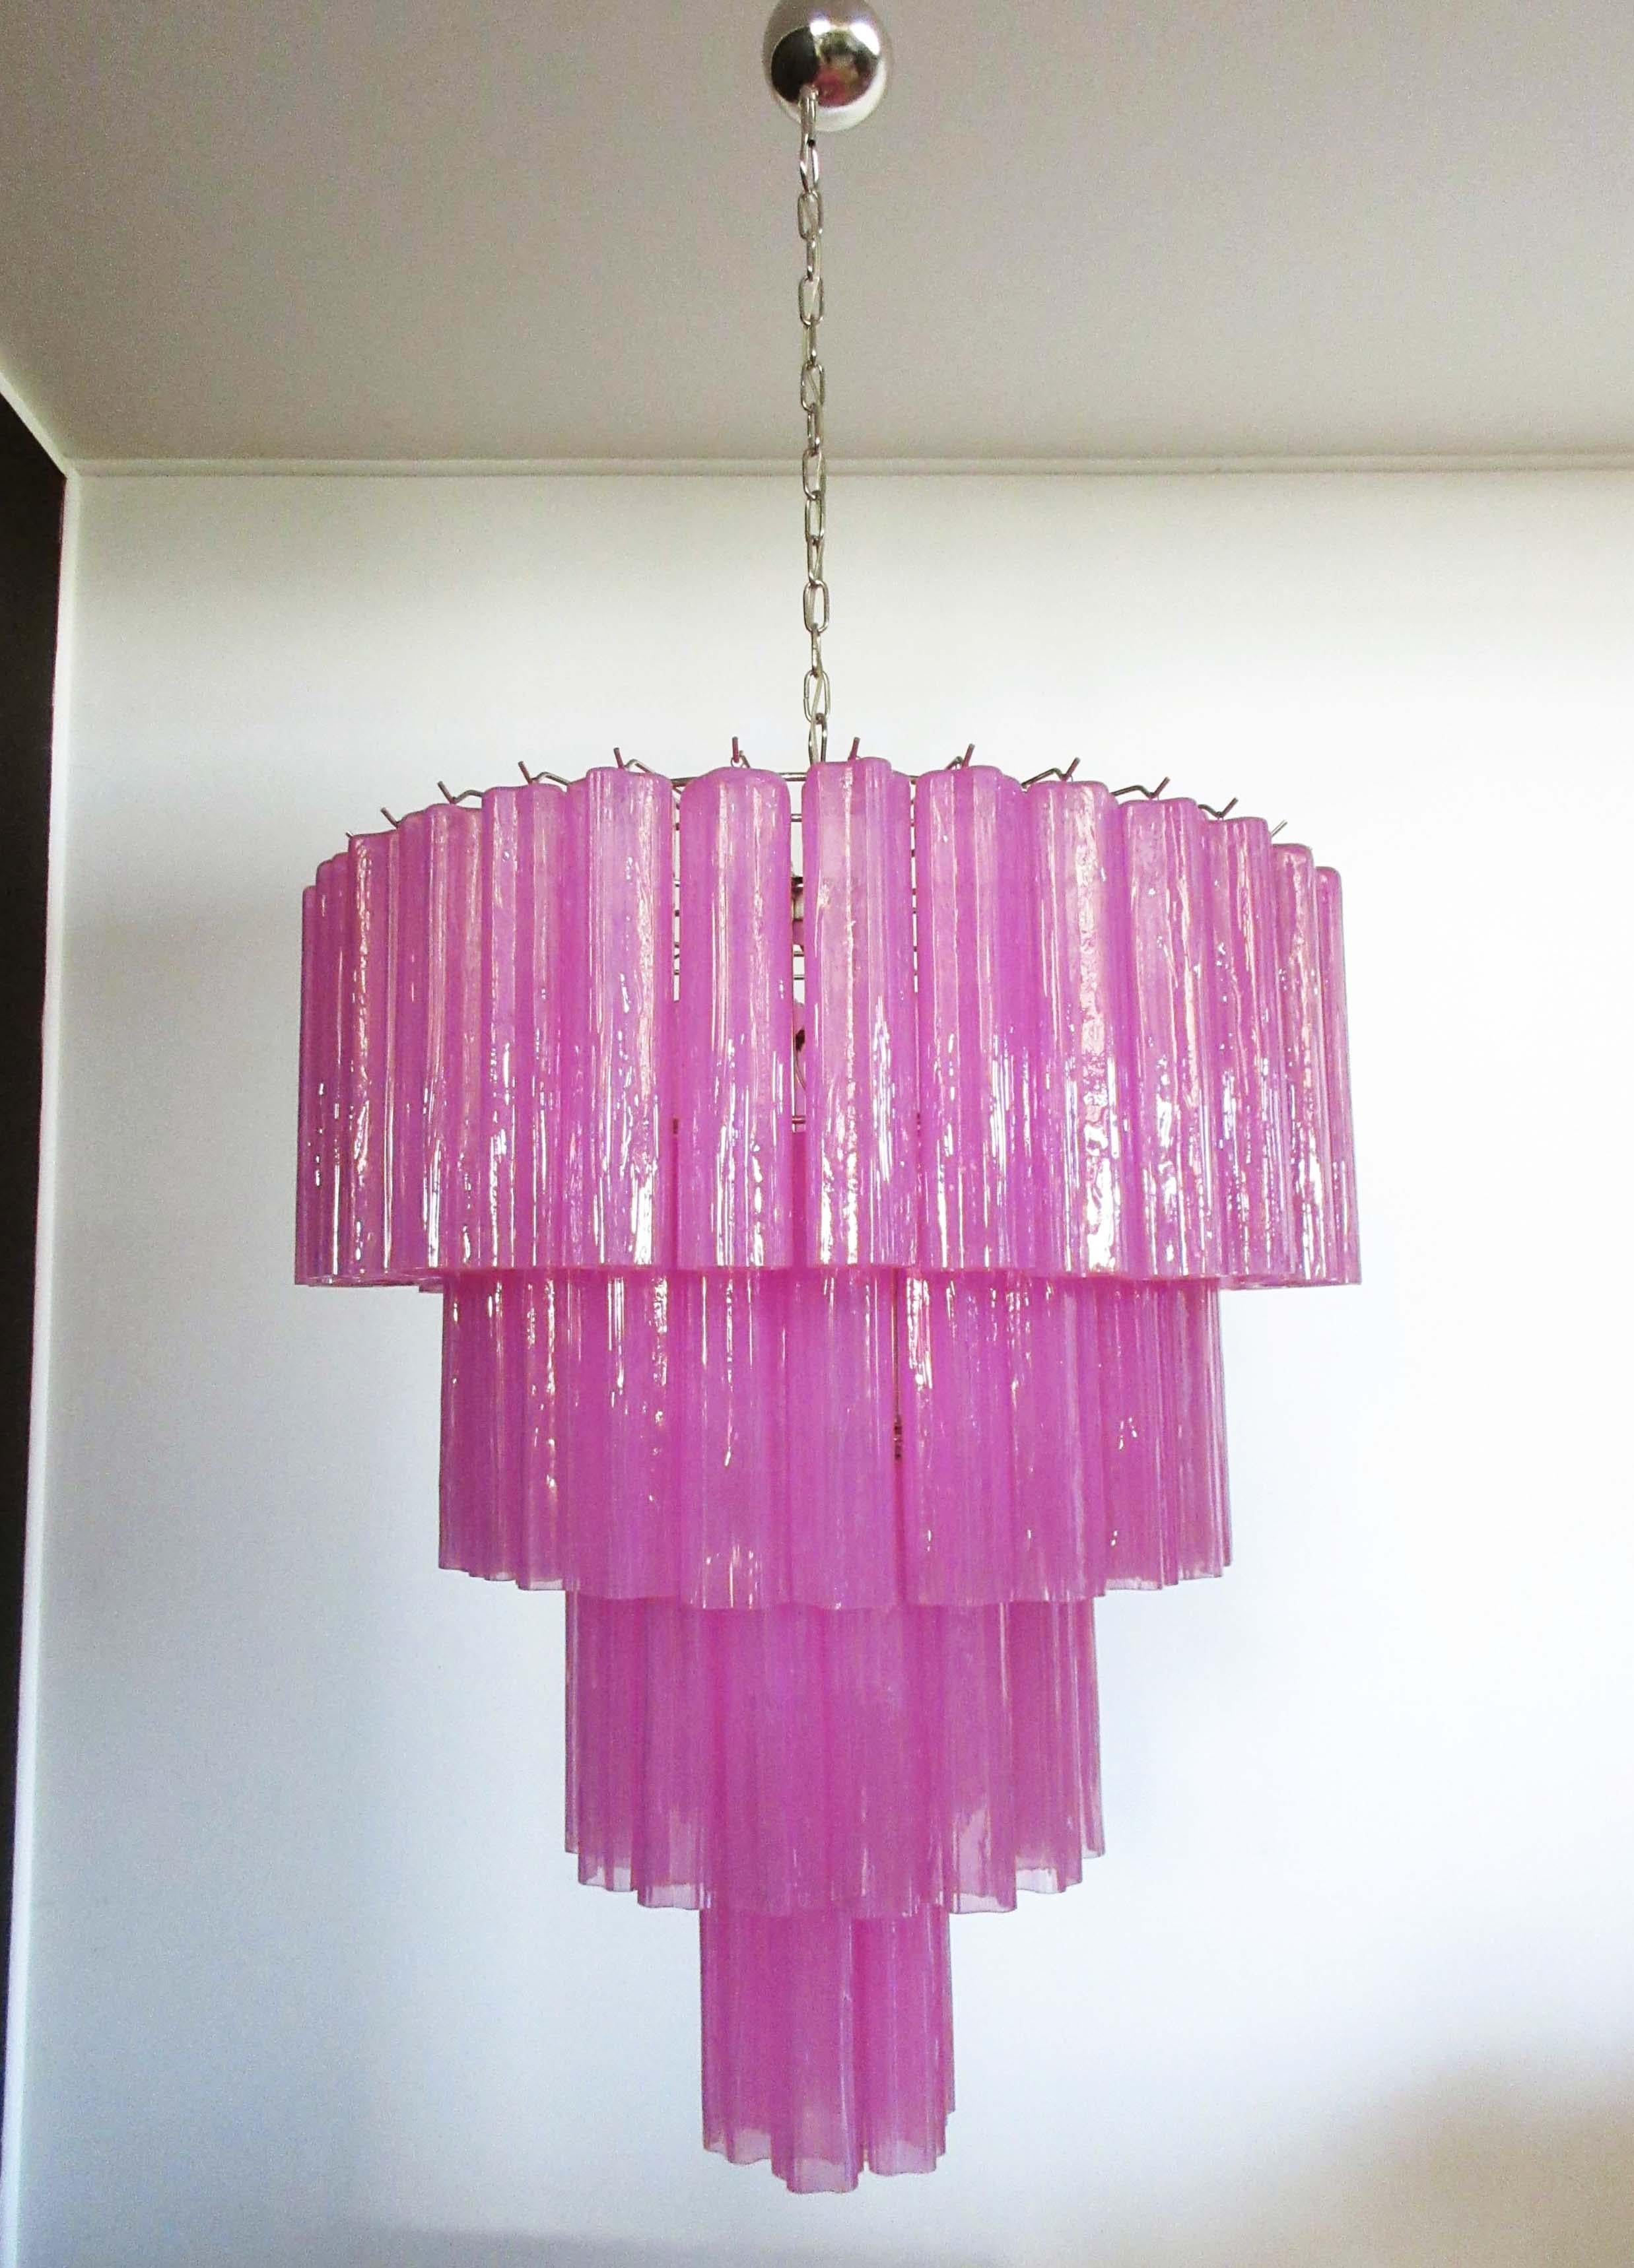 Late 20th Century Huge Vintage Murano Glass Tiered Chandelier, 78 Glasses, Pink Fuxia Silk For Sale